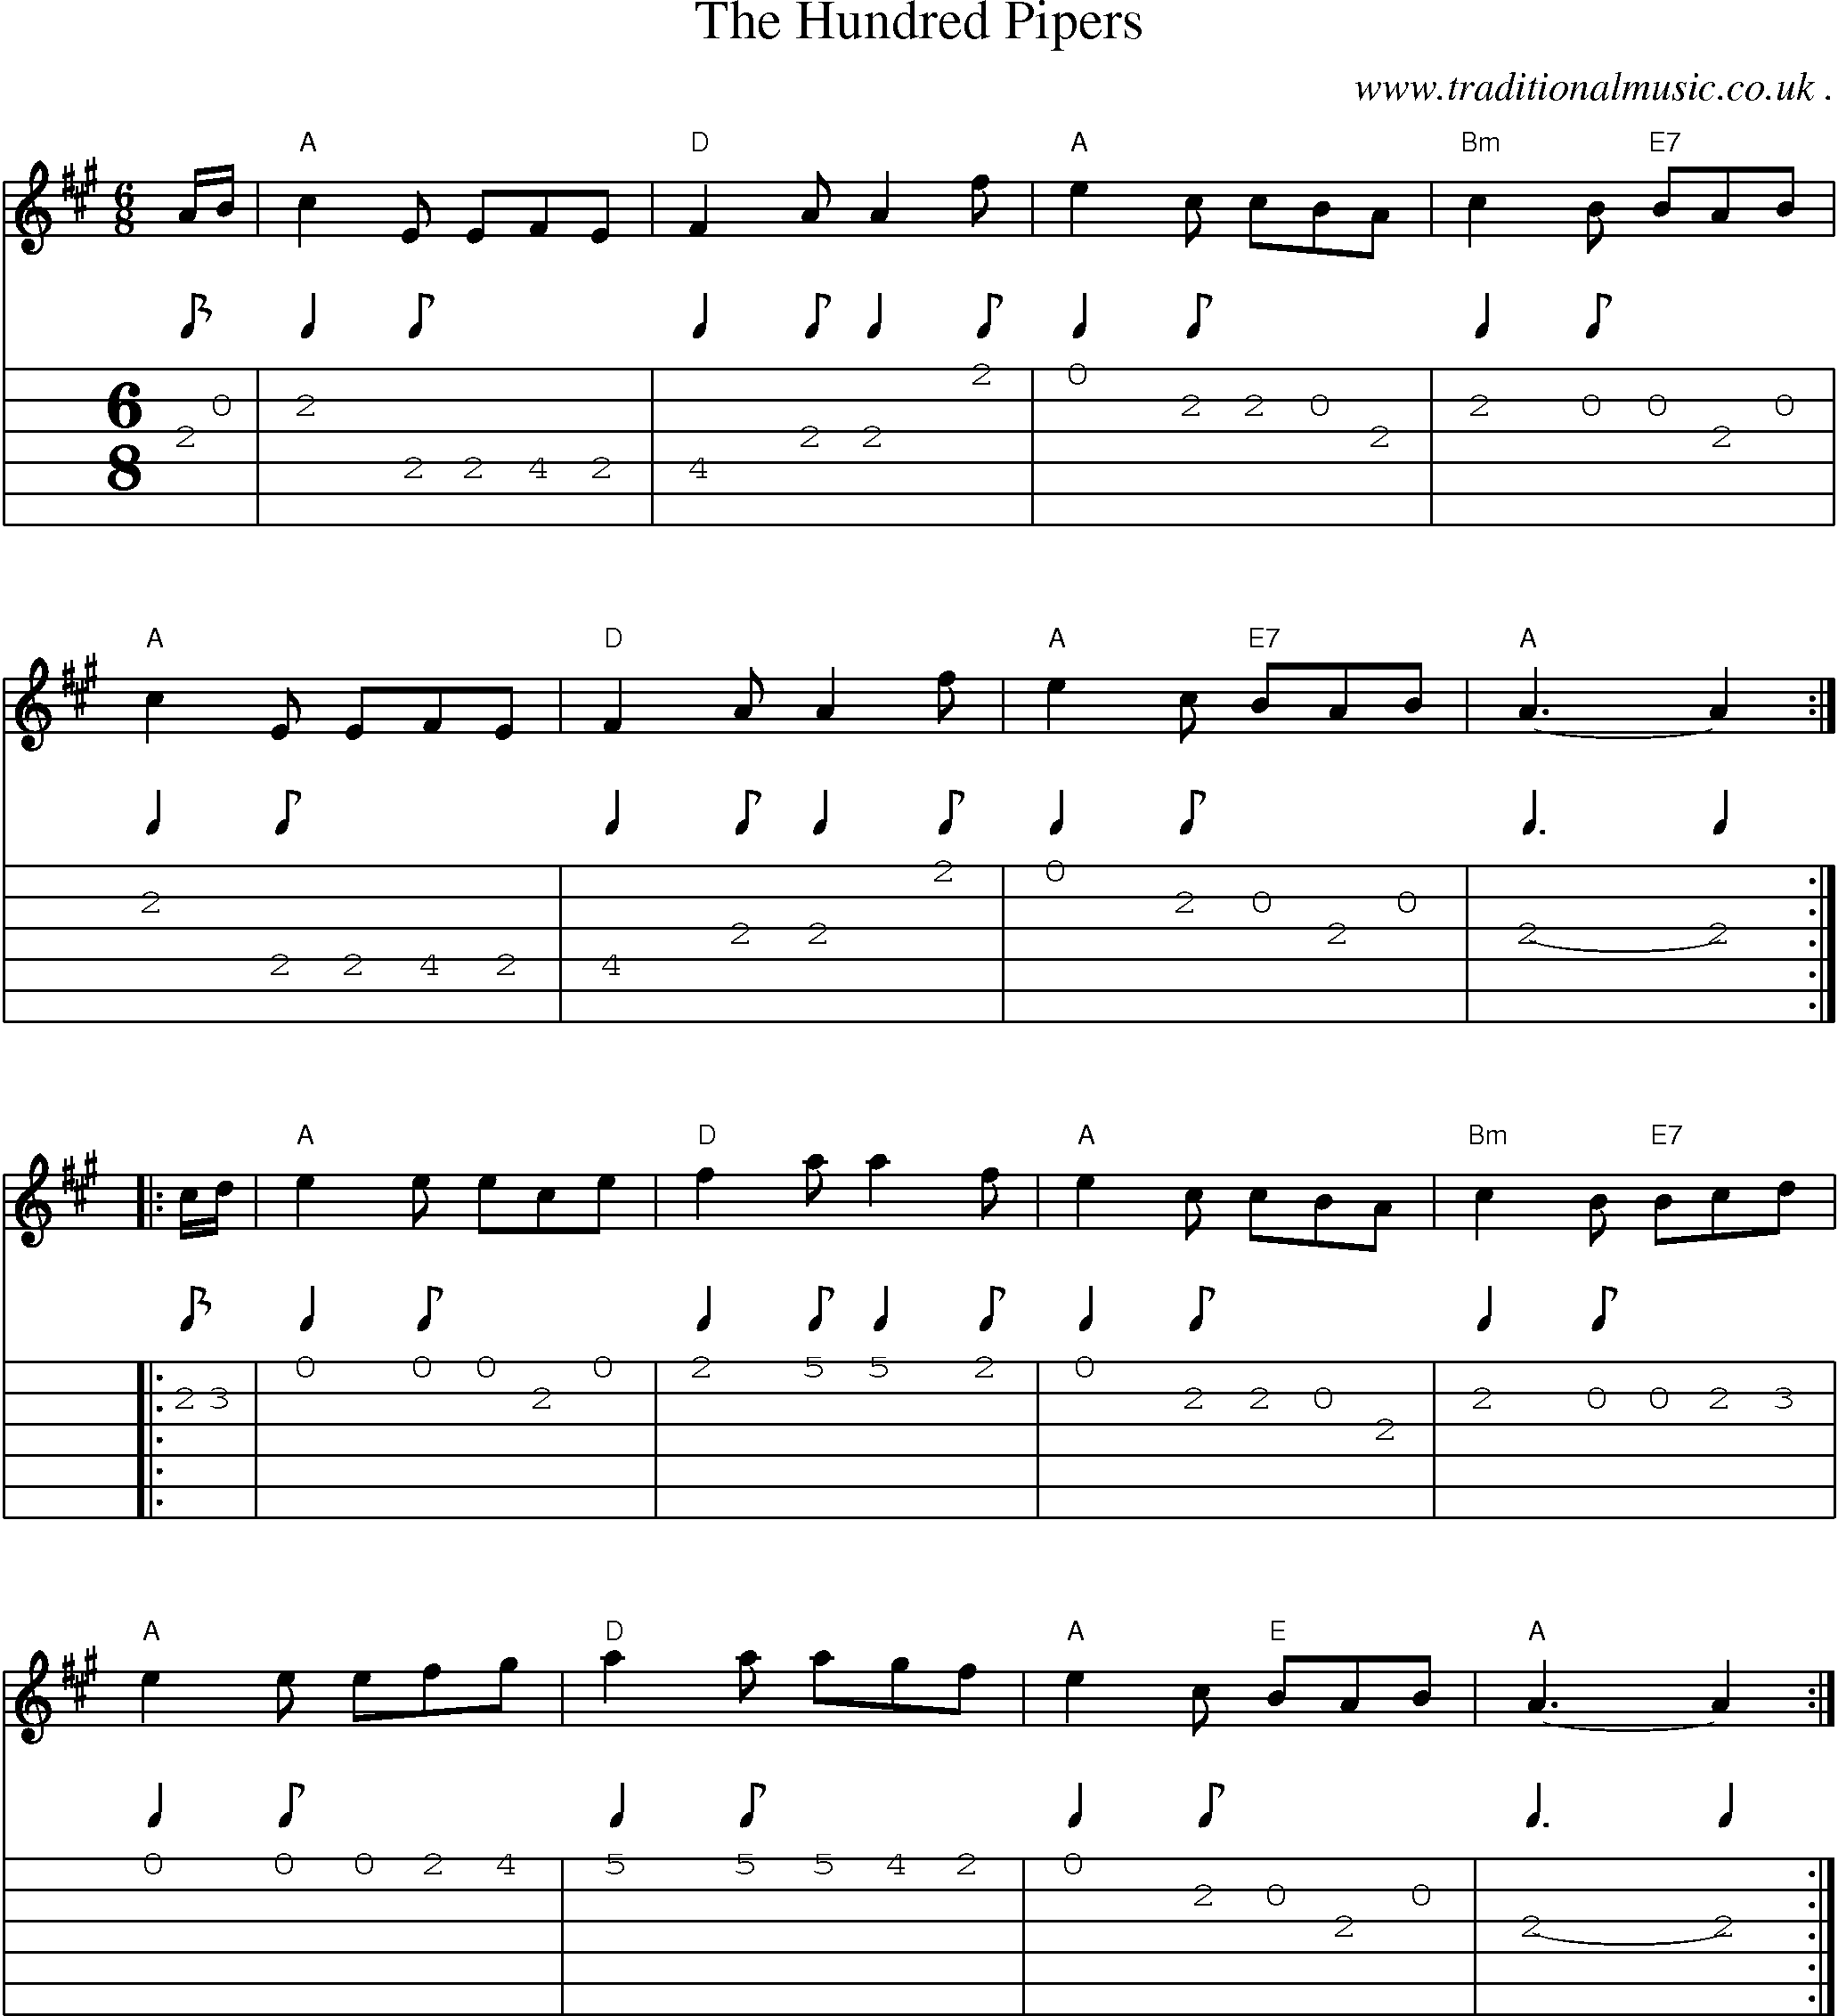 Sheet-music  score, Chords and Guitar Tabs for The Hundred Pipers